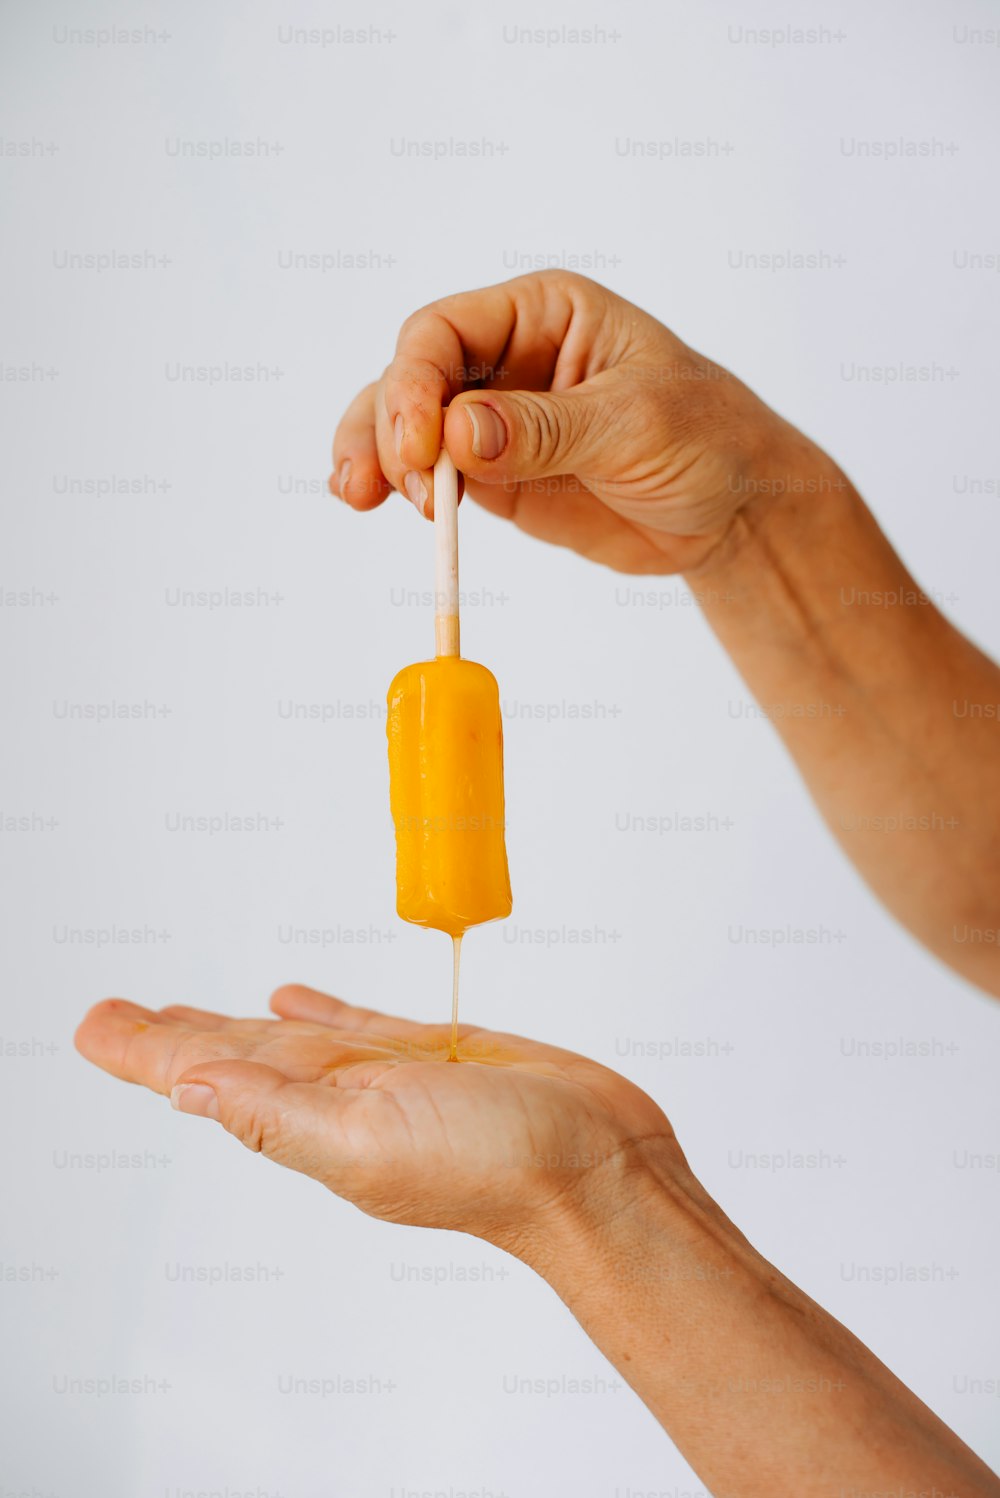 a person holding a piece of food in their hand